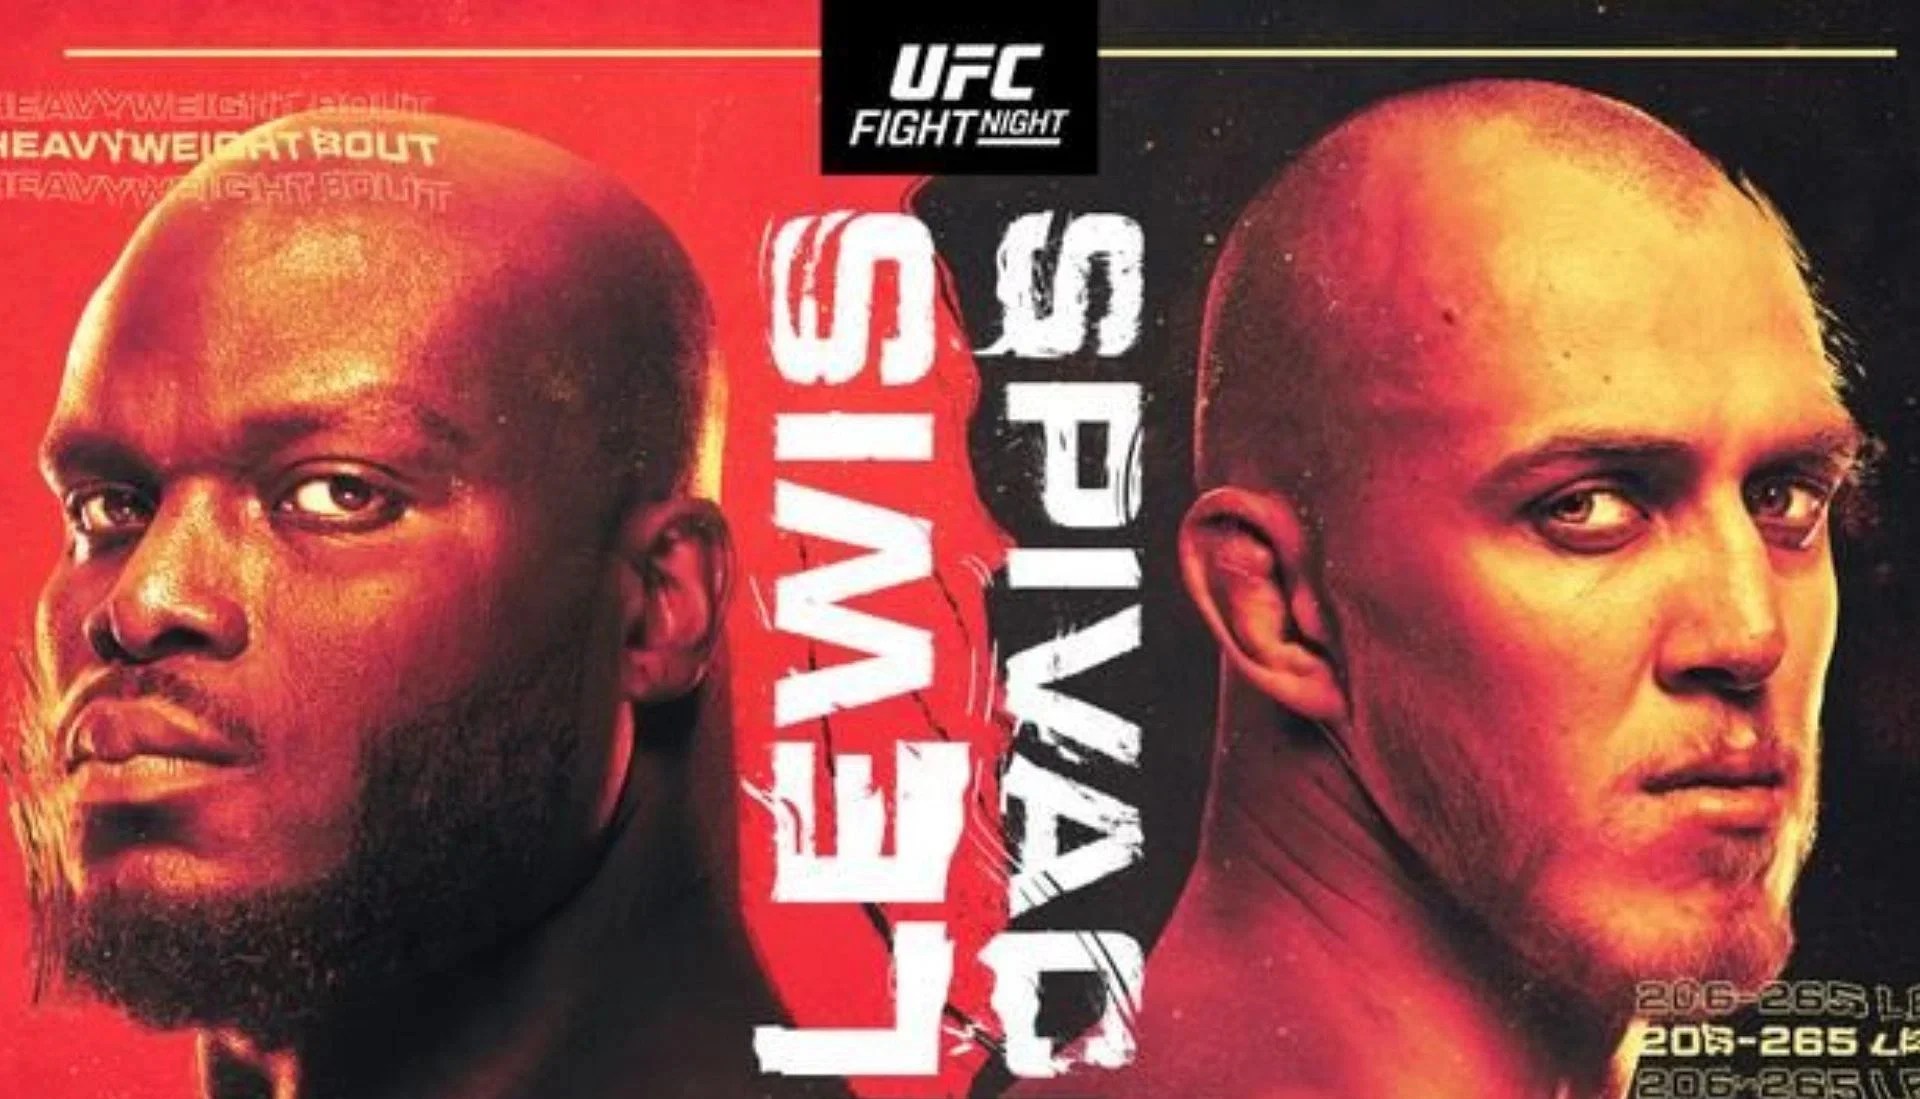 UFC schedule: Is there a UFC Fight tonight? 